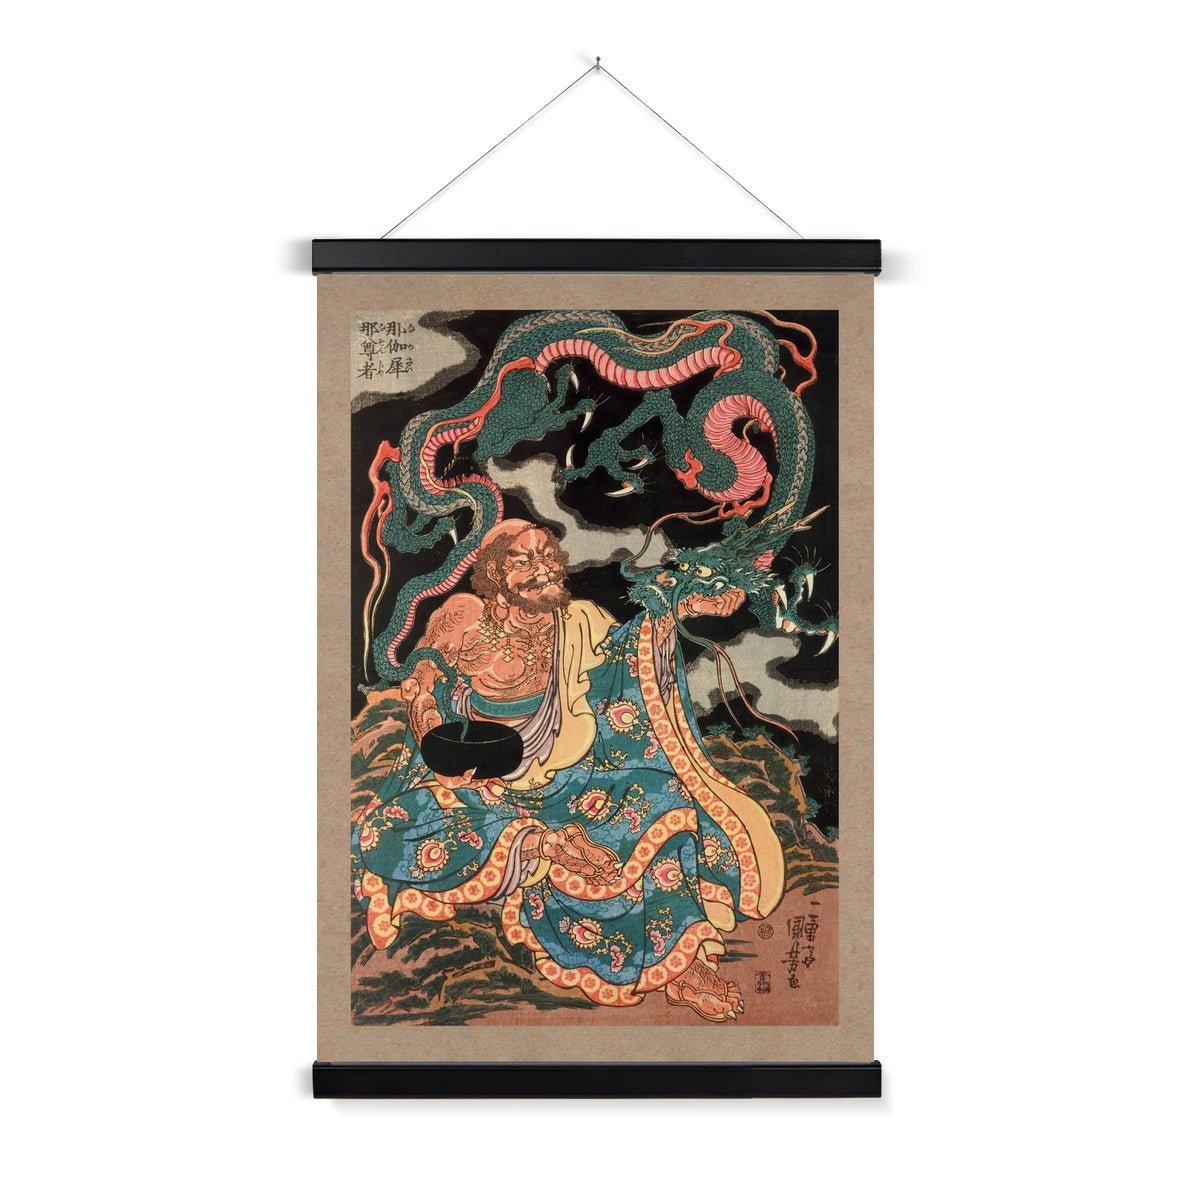 Fine art 6&quot;x8&quot; / Black Frame The Arhat Nakasaina Sonja Seated On a Rock, with a Dragon Emerging From His Bowl, Vintage Buddhist Japanese Fine Art Print with Hanger